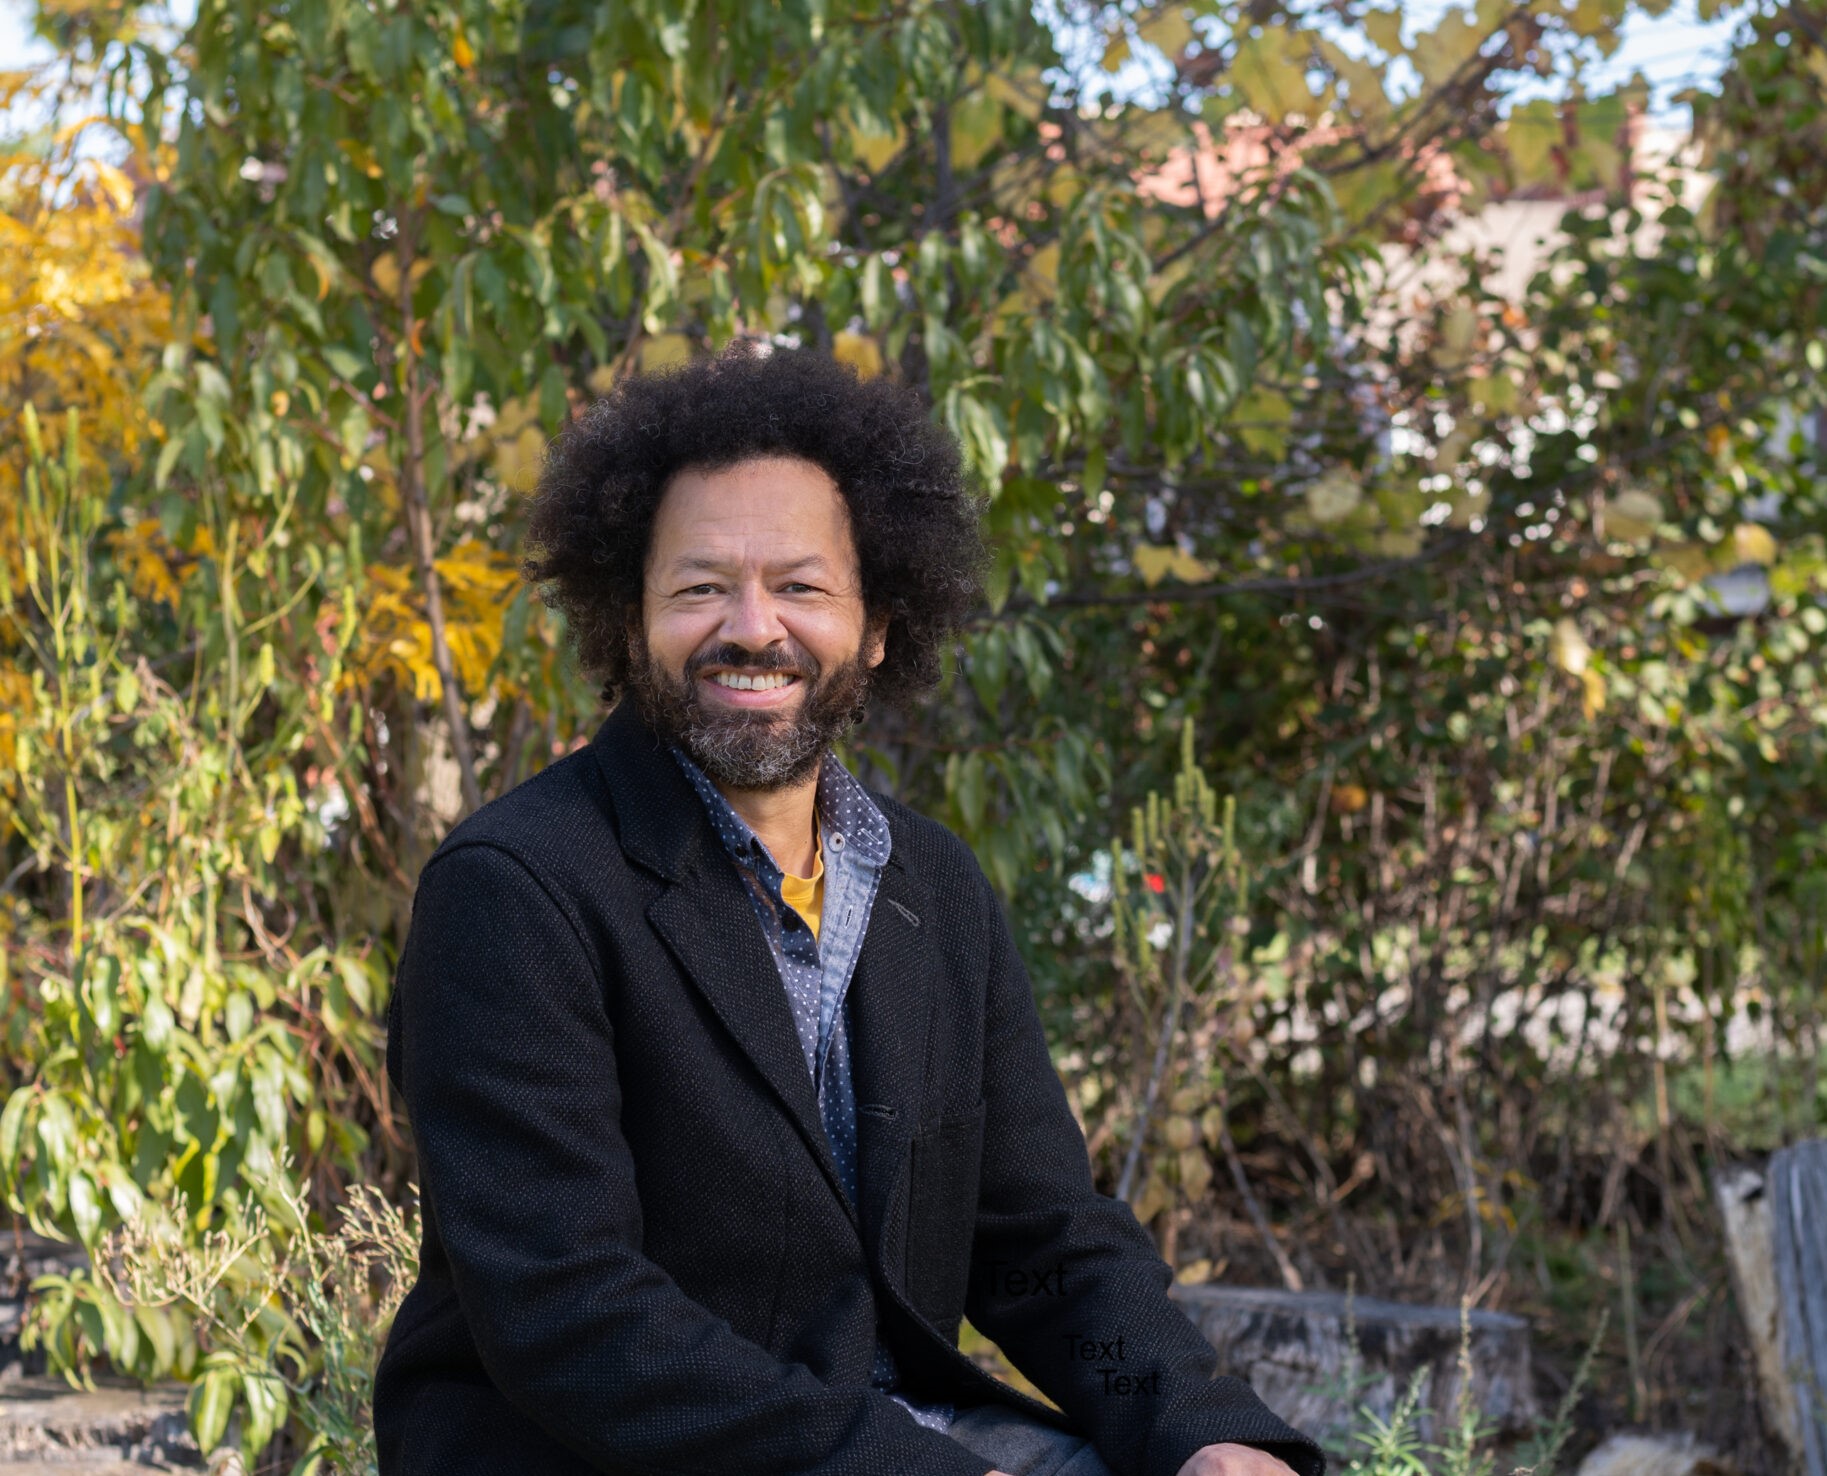 Portrait of David Brown seated in an outdoor space, smiling and wearing a black jacket, grey pants, and a blue shirt.